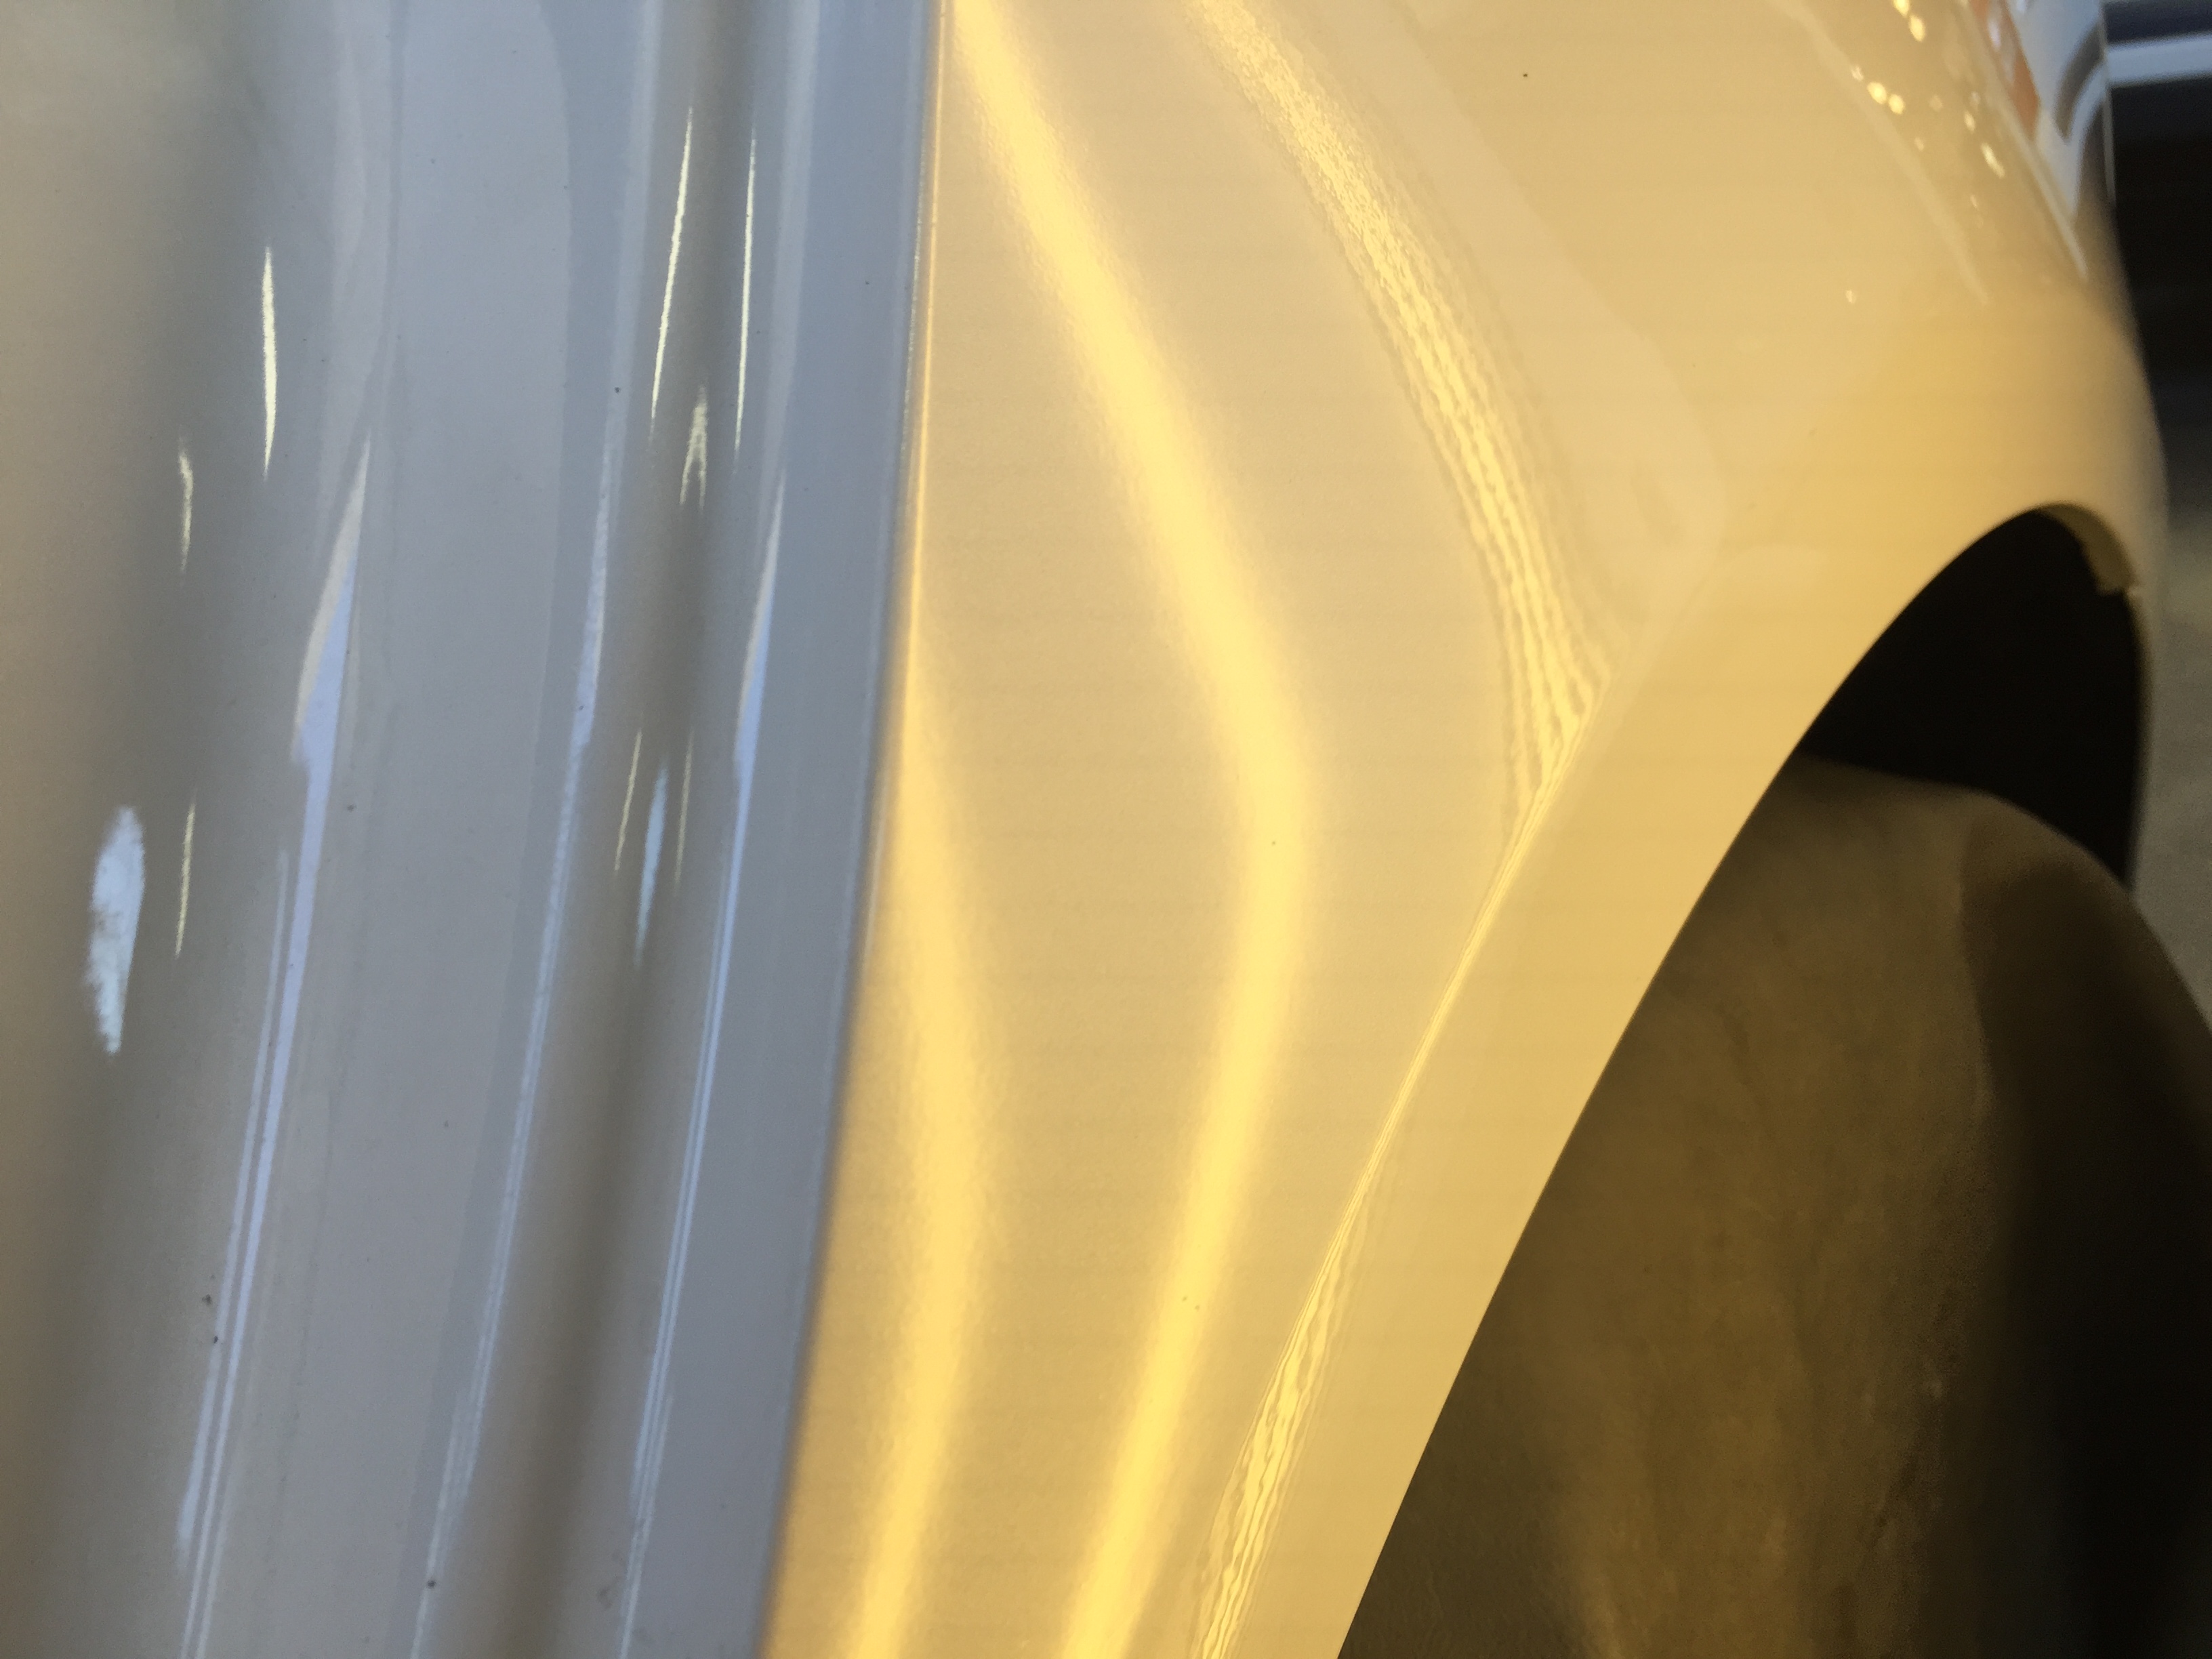 2016 Ford Fusion Dent Removal, Springfield, IL. https://217dent.com, Paintless Dent Repair Rear Quarter